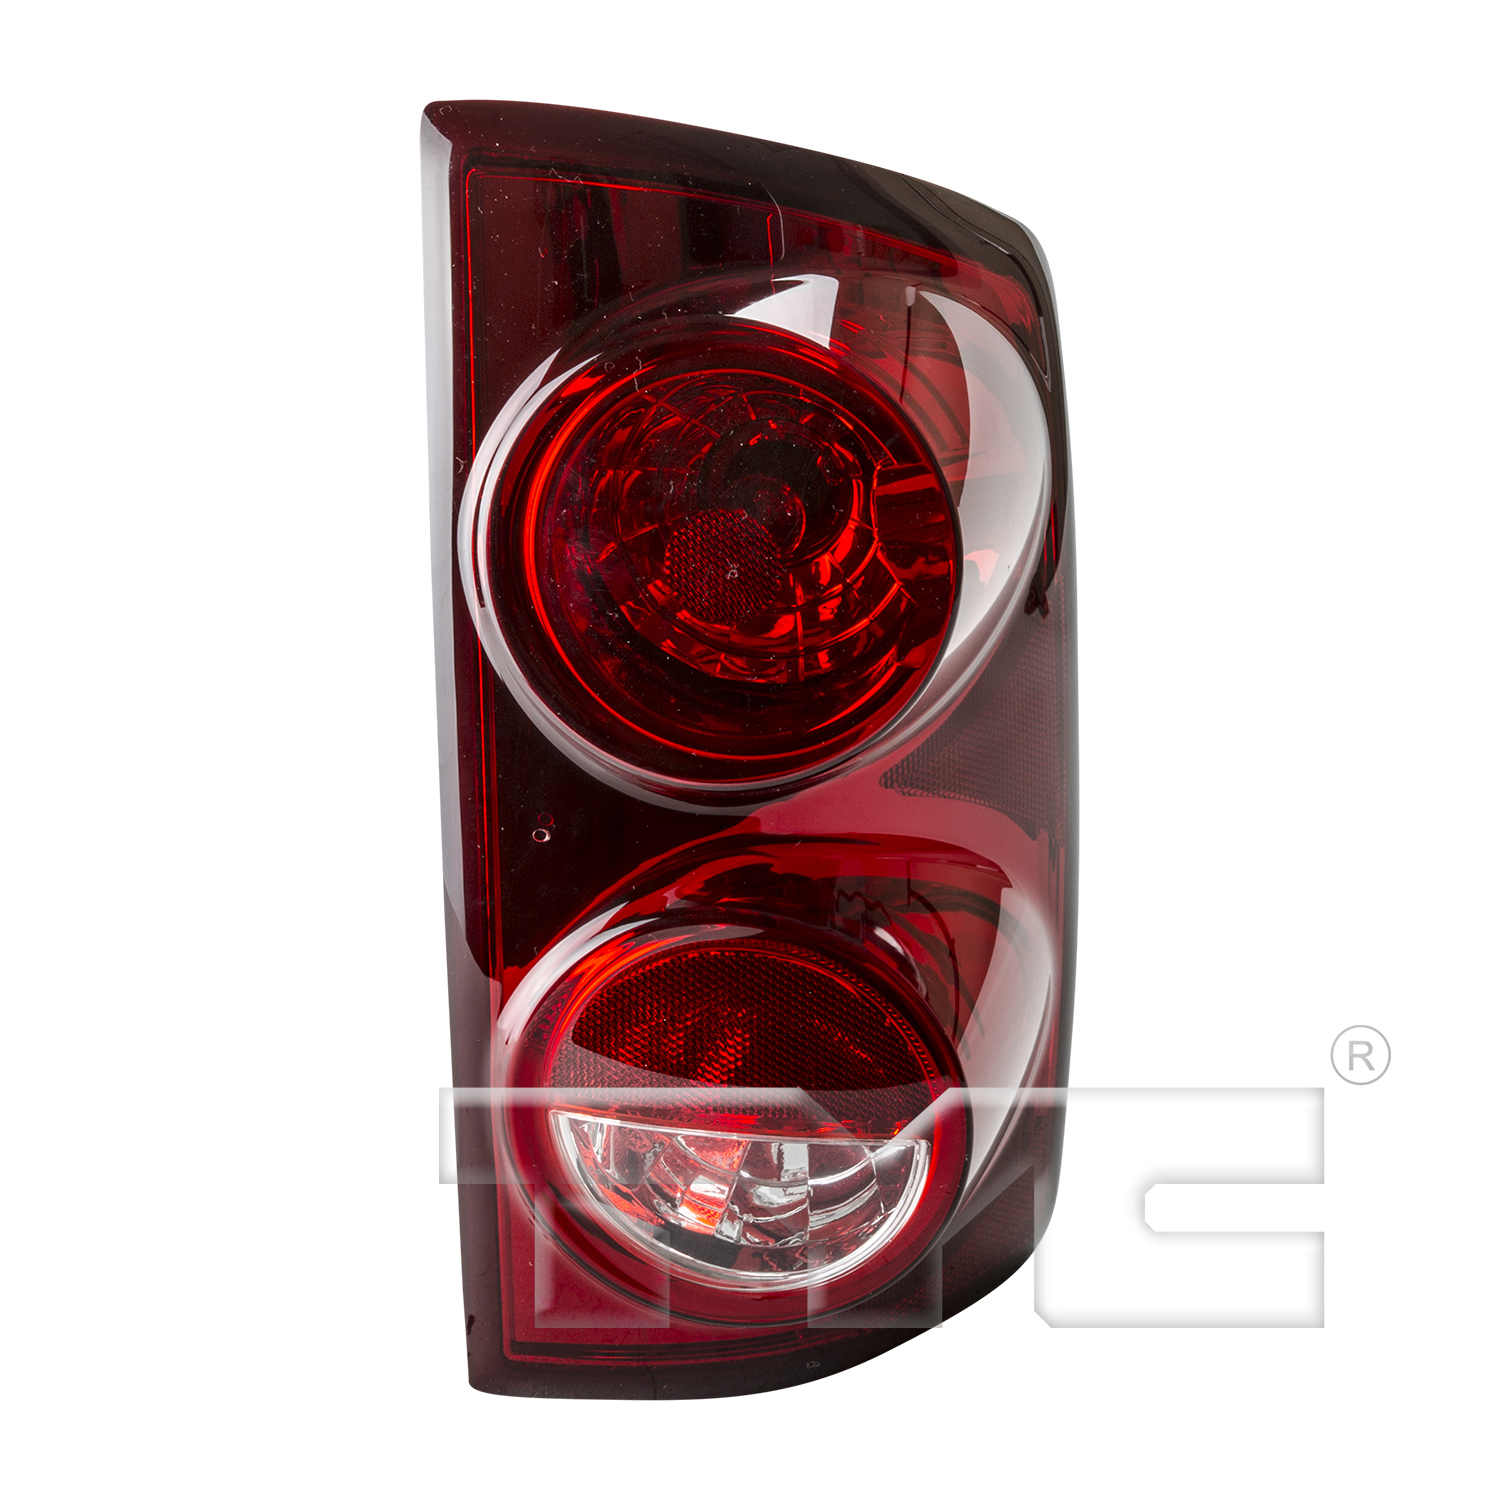 Aftermarket TAILLIGHTS for DODGE - RAM 1500, RAM 1500,07-08,RT Taillamp assy